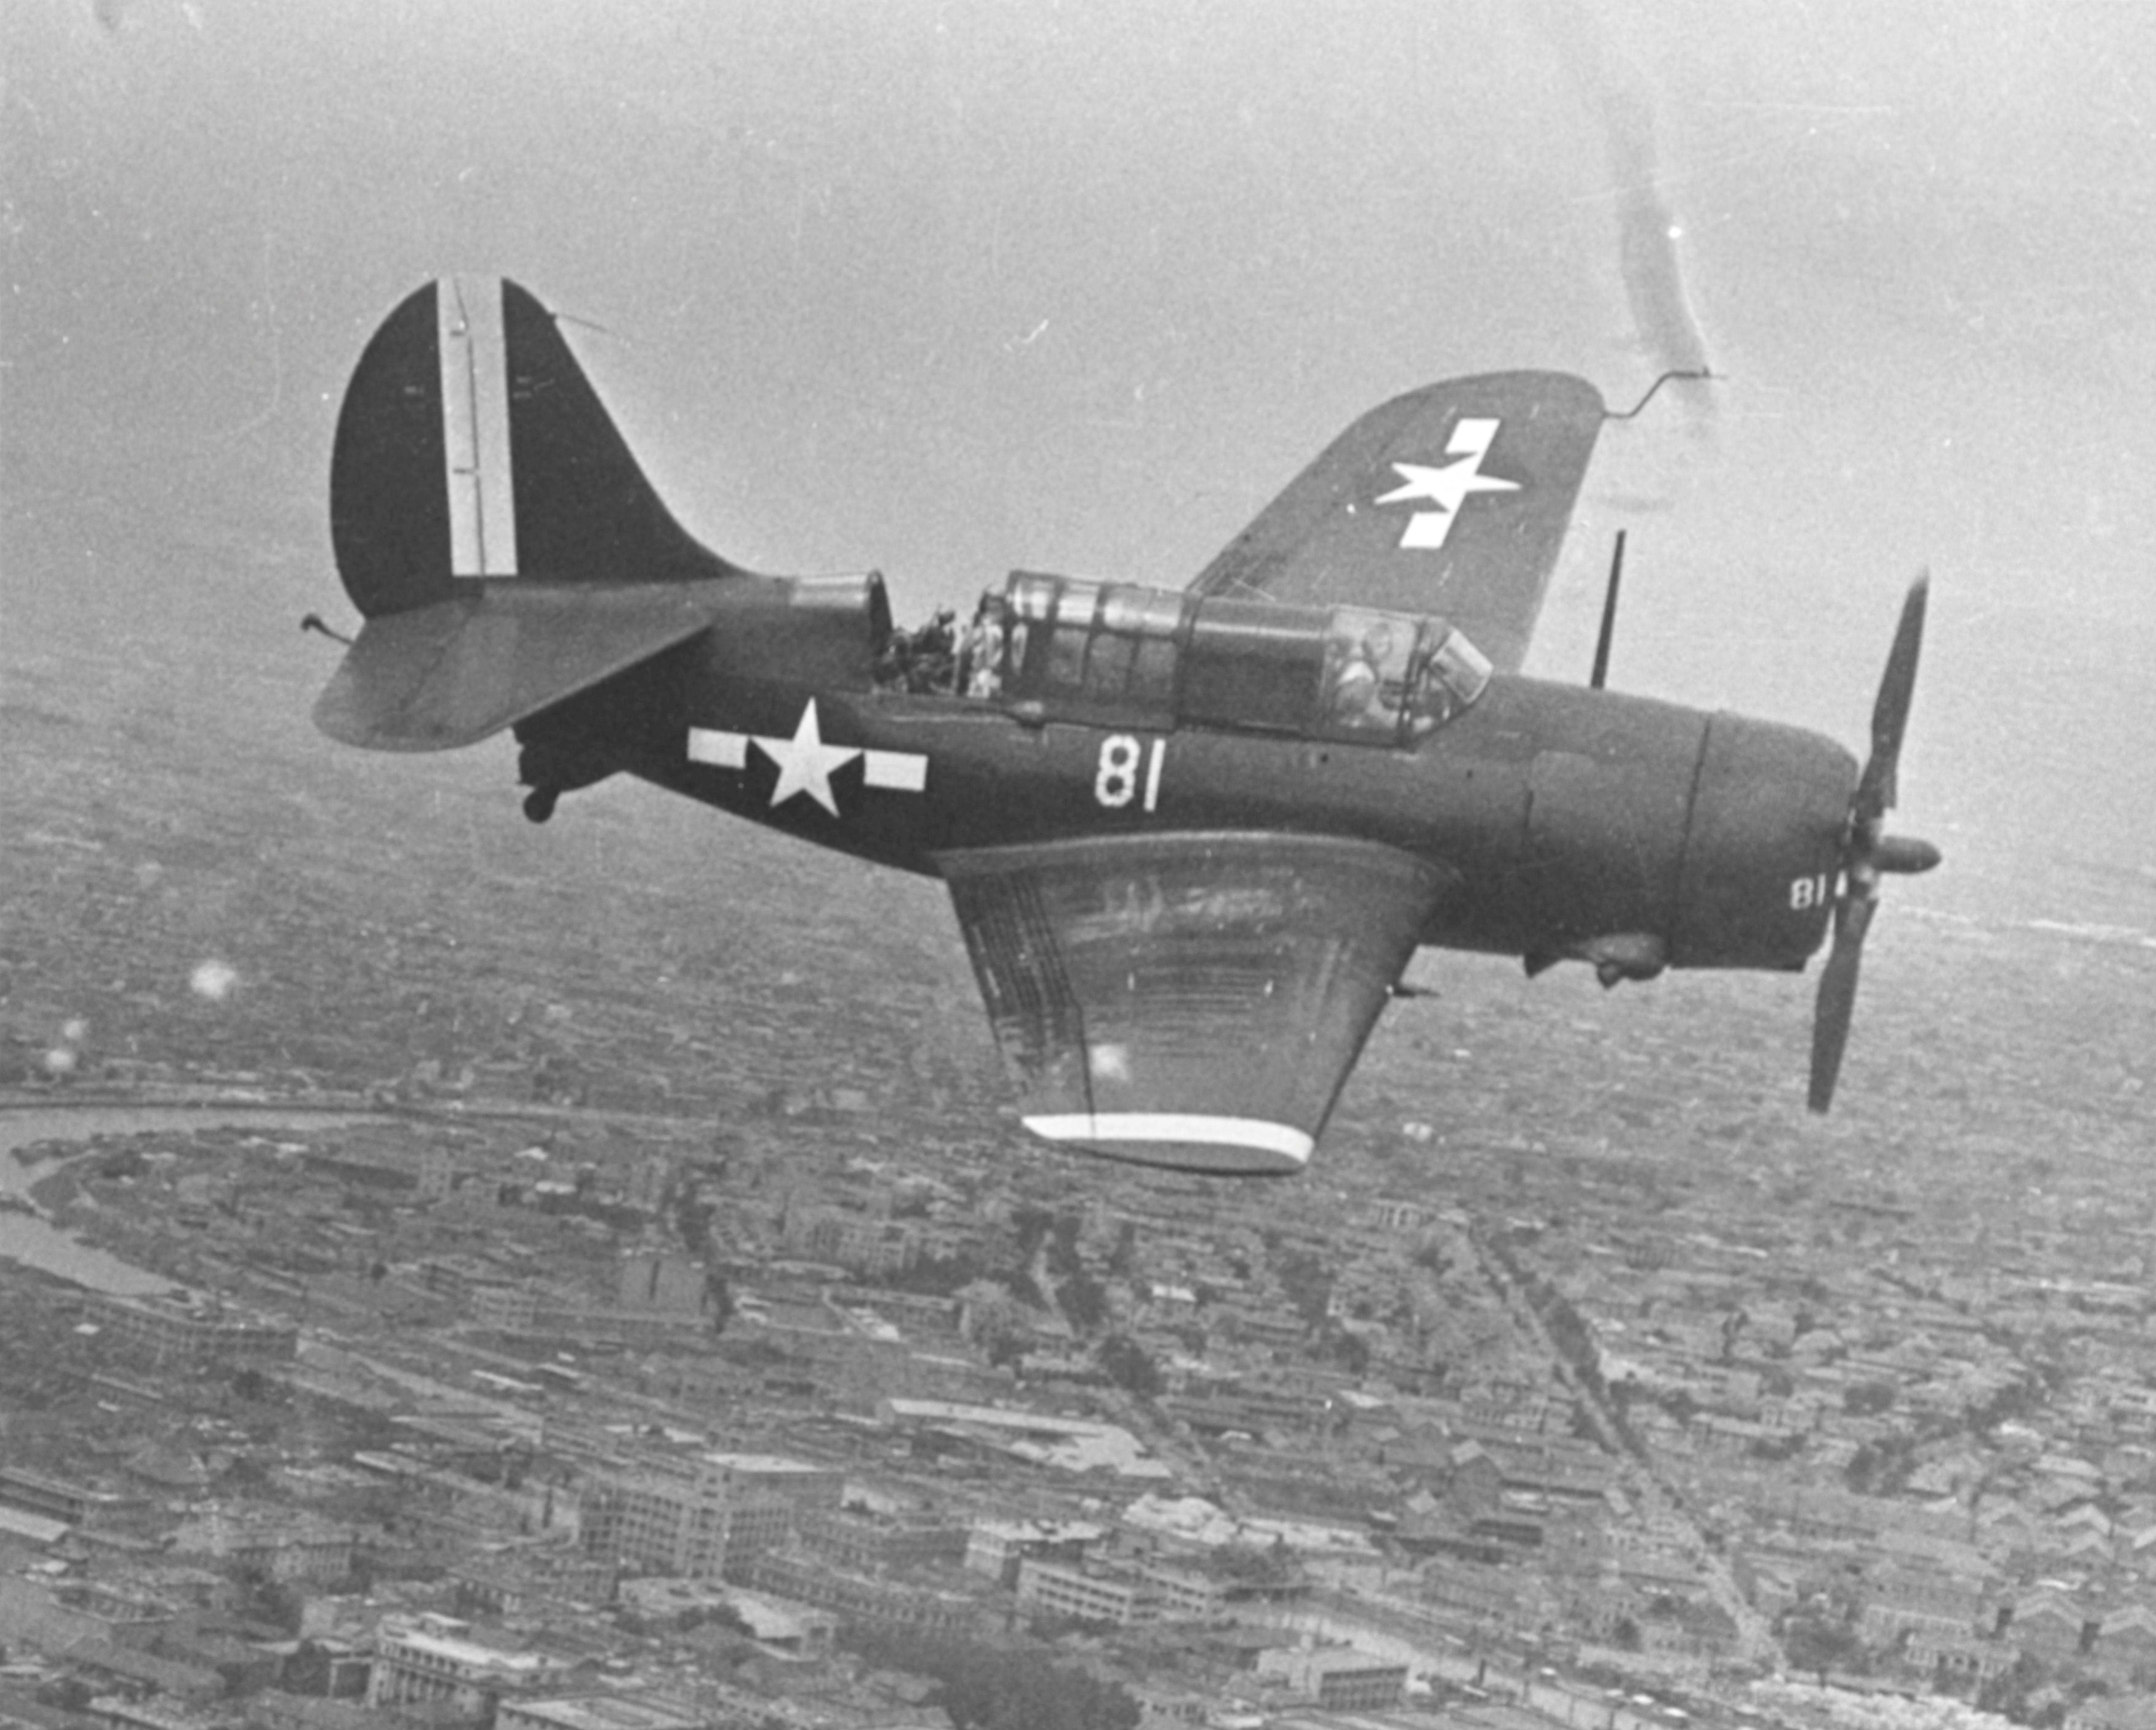 A Curtis SB2C Helldiver flying from USS Intrepid over Tientsin, China (now Tianjin), 5 Sep 1945. Intrepid launched 86 aircraft this day as a show of strength during the demobilization of Japanese forces in the area.